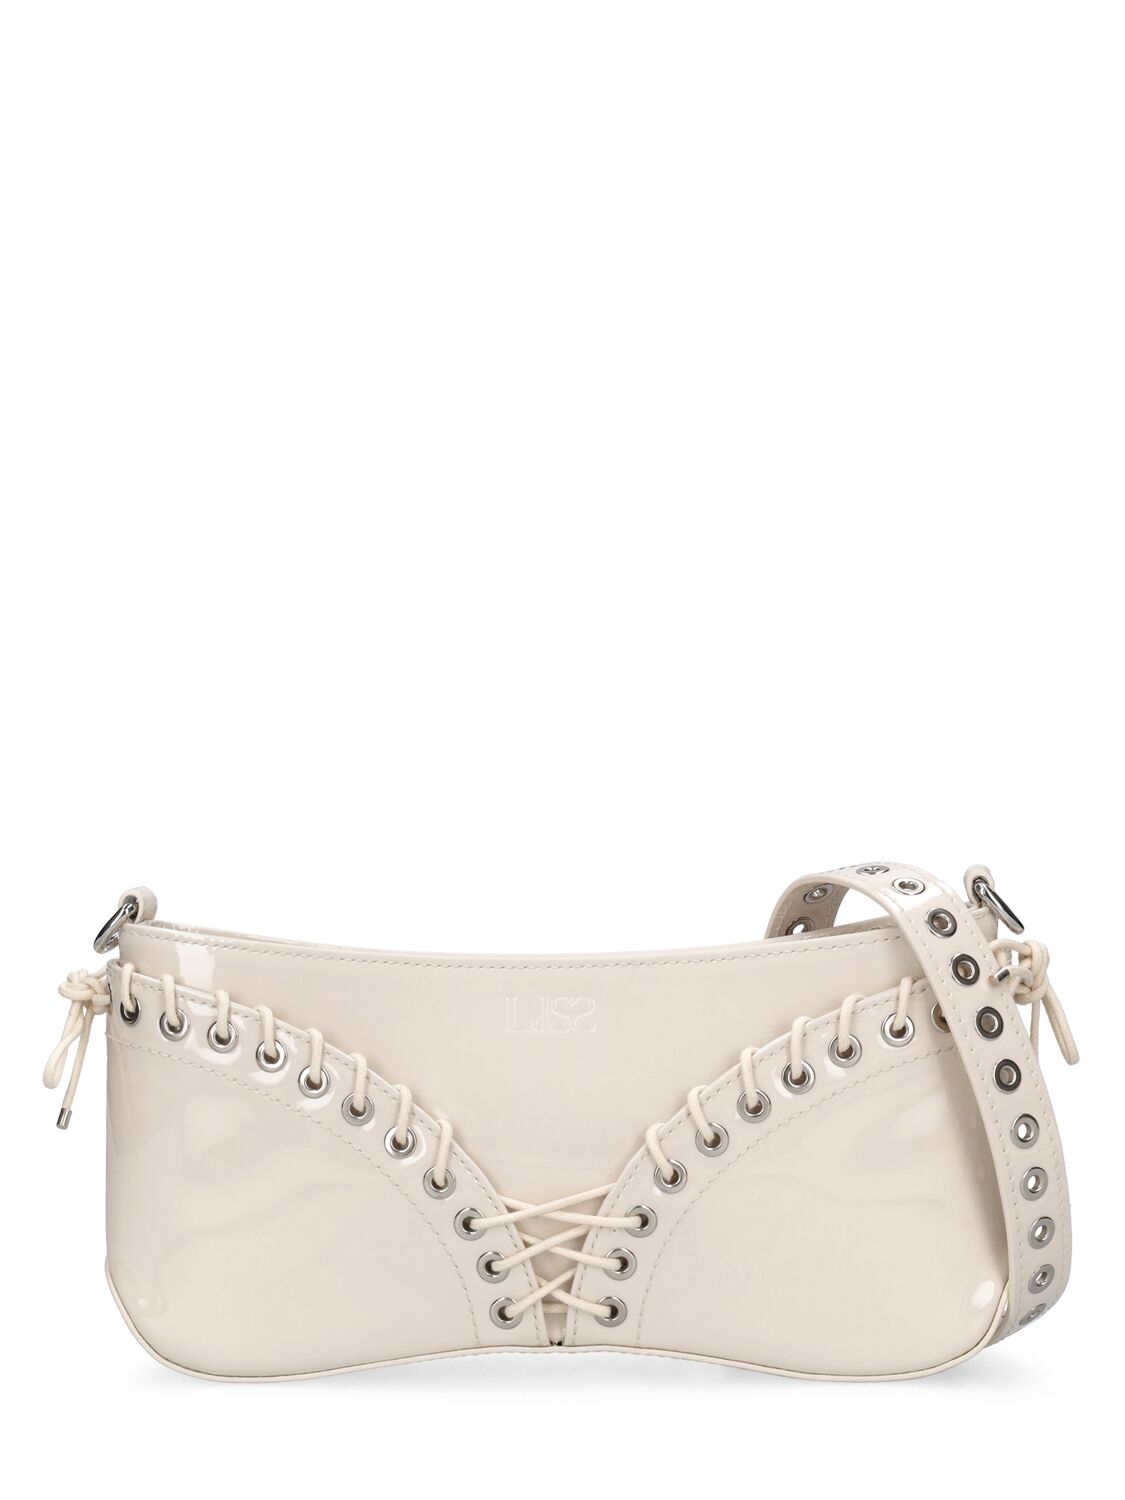 Cleavage Patent Leather Shoulder Bag